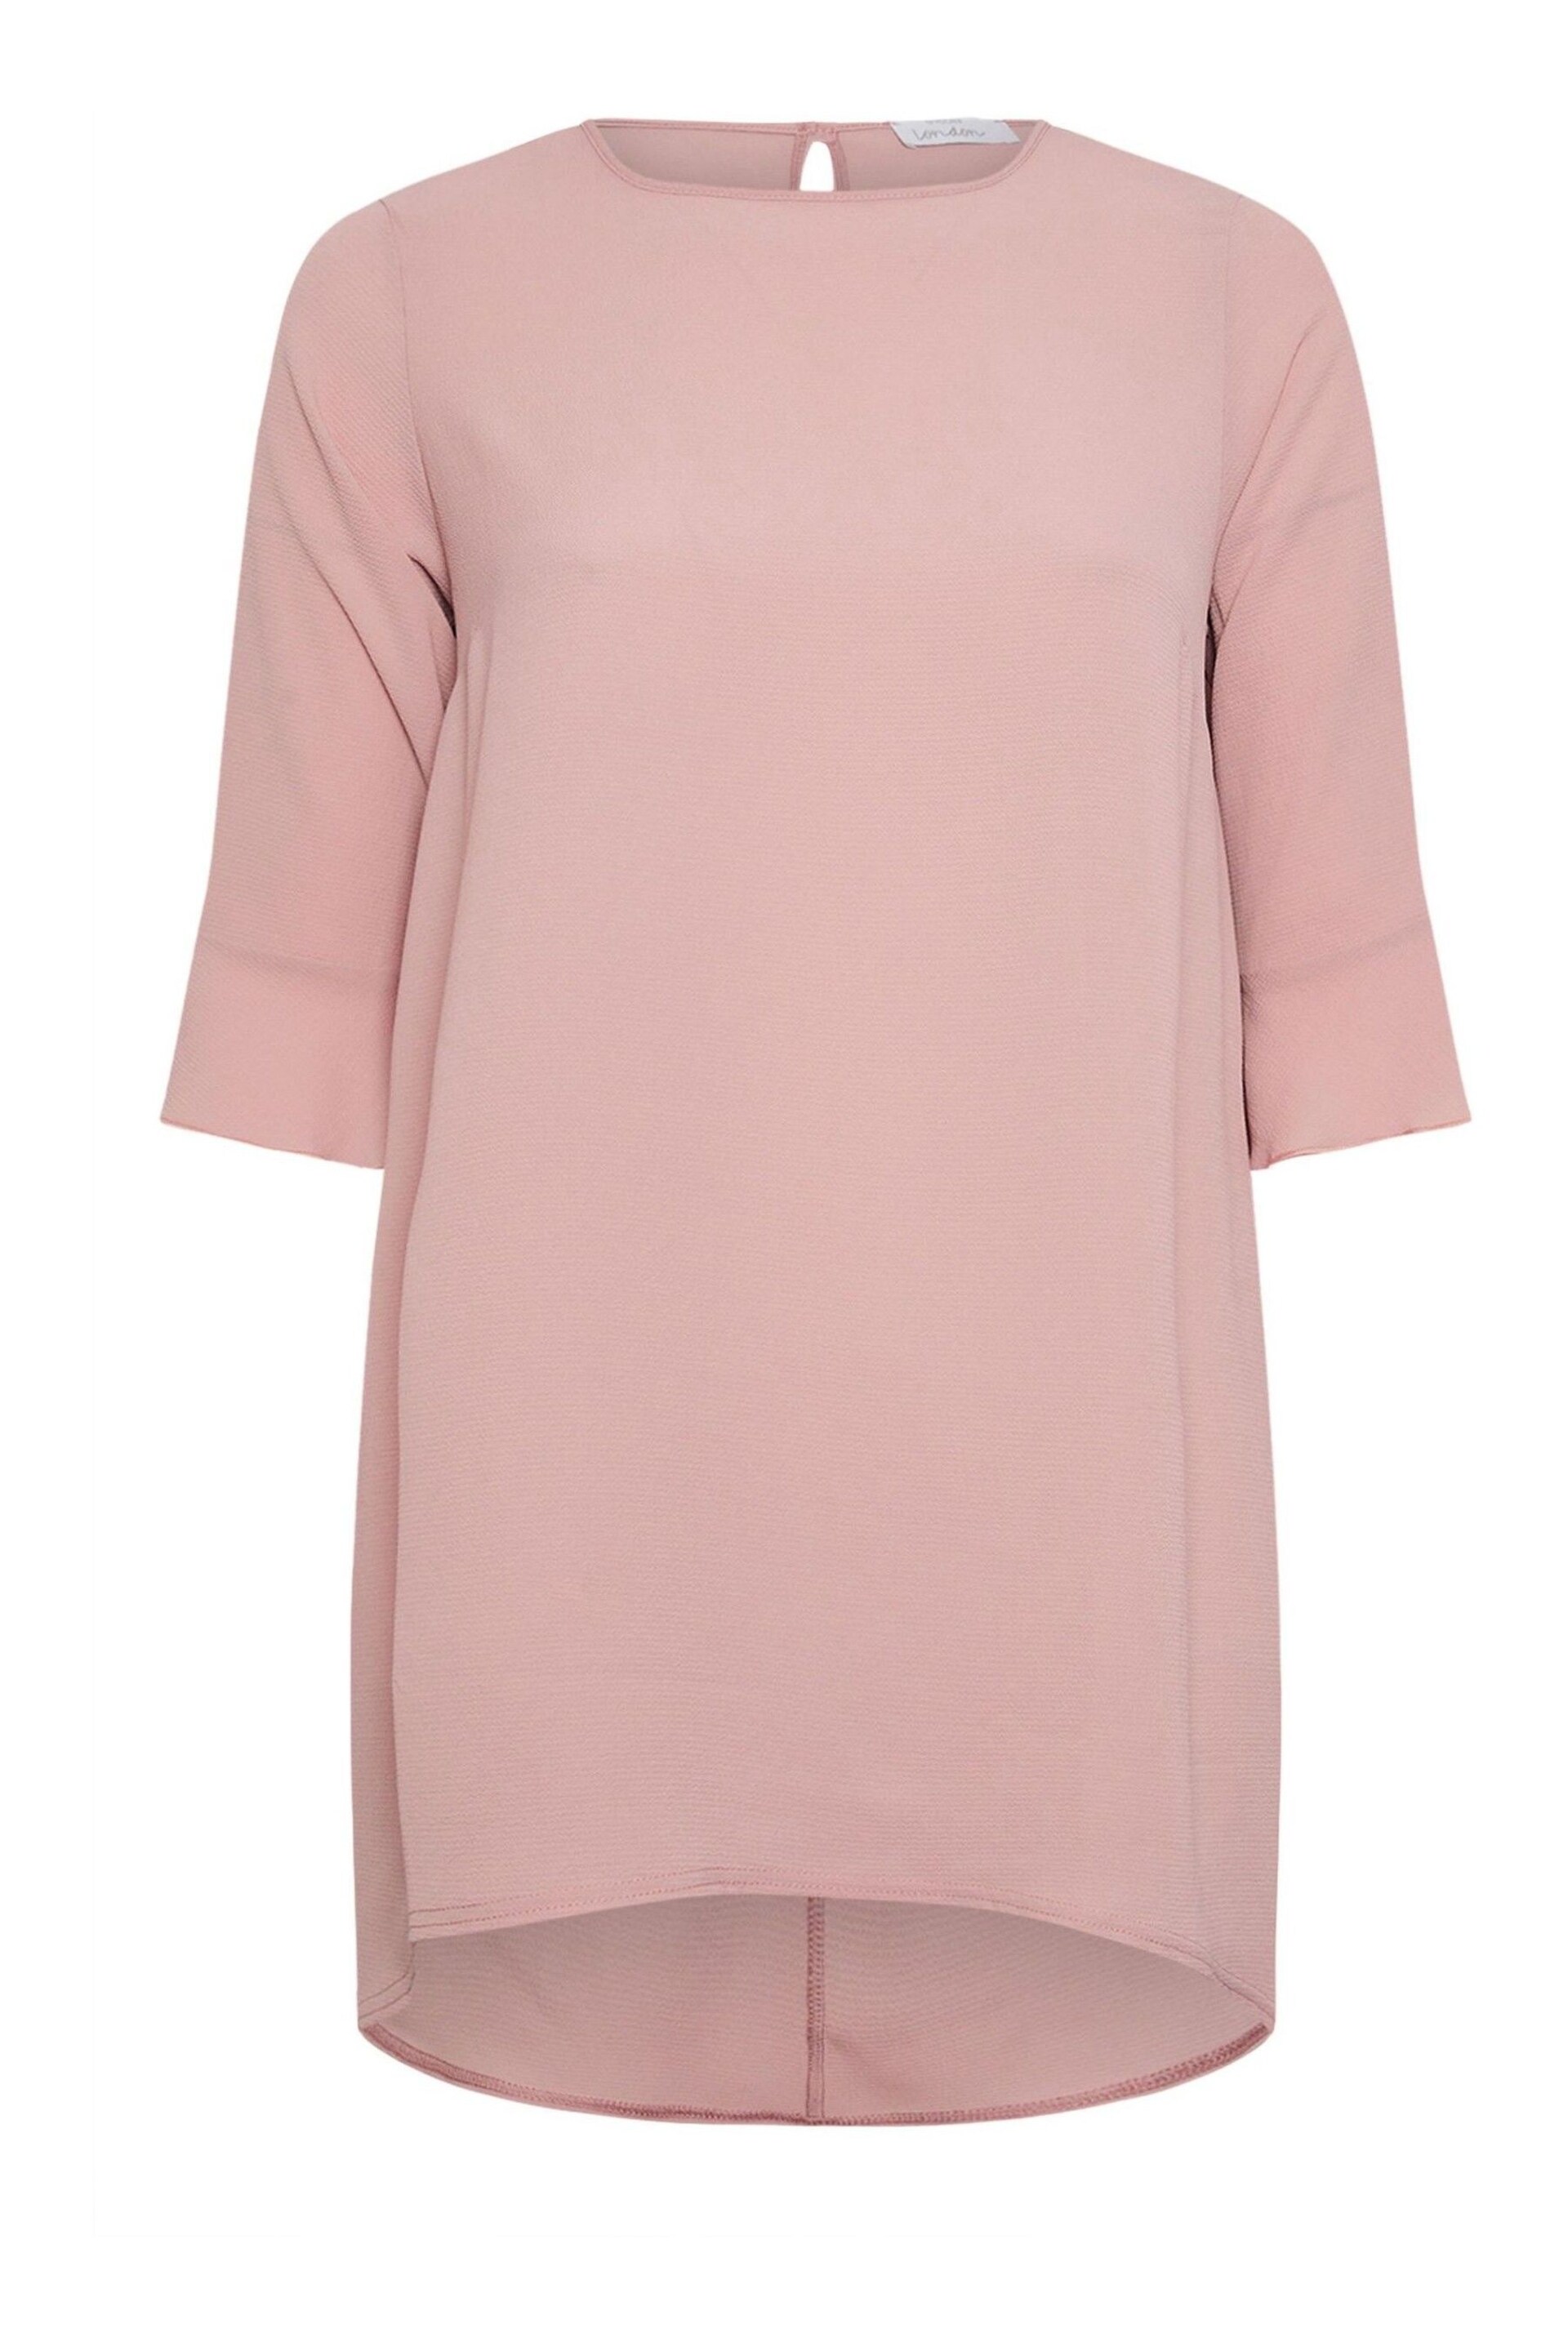 Yours Curve Pink Flute Sleeve Tunic - Image 2 of 2